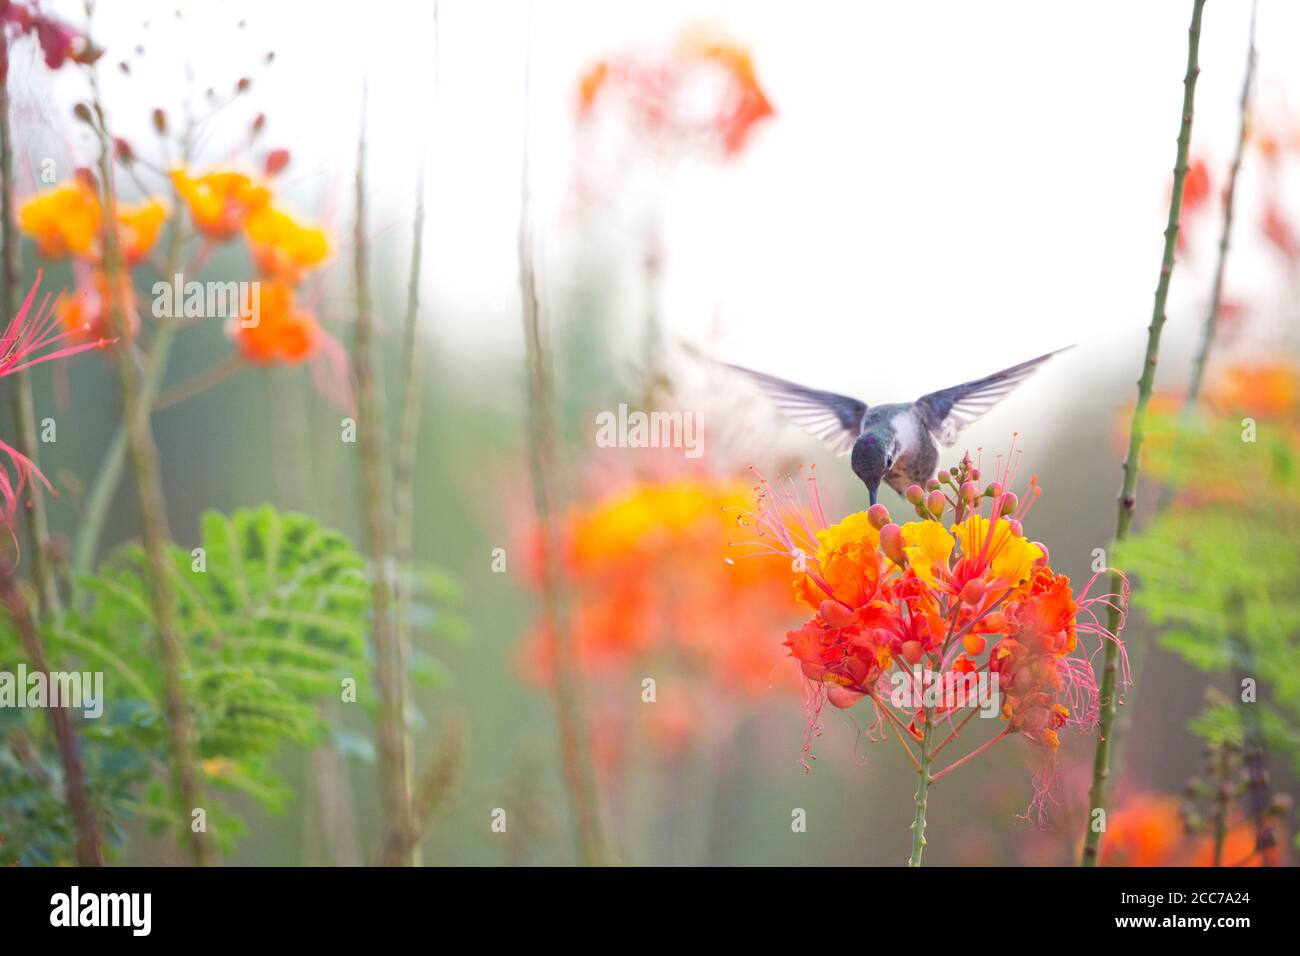 Broad-billed hummingbird sips nectar from Peacock Flower, also known as Red Bird of Paradise and Pride of Barbados. Location is Tucson, Arizona home g Stock Photo